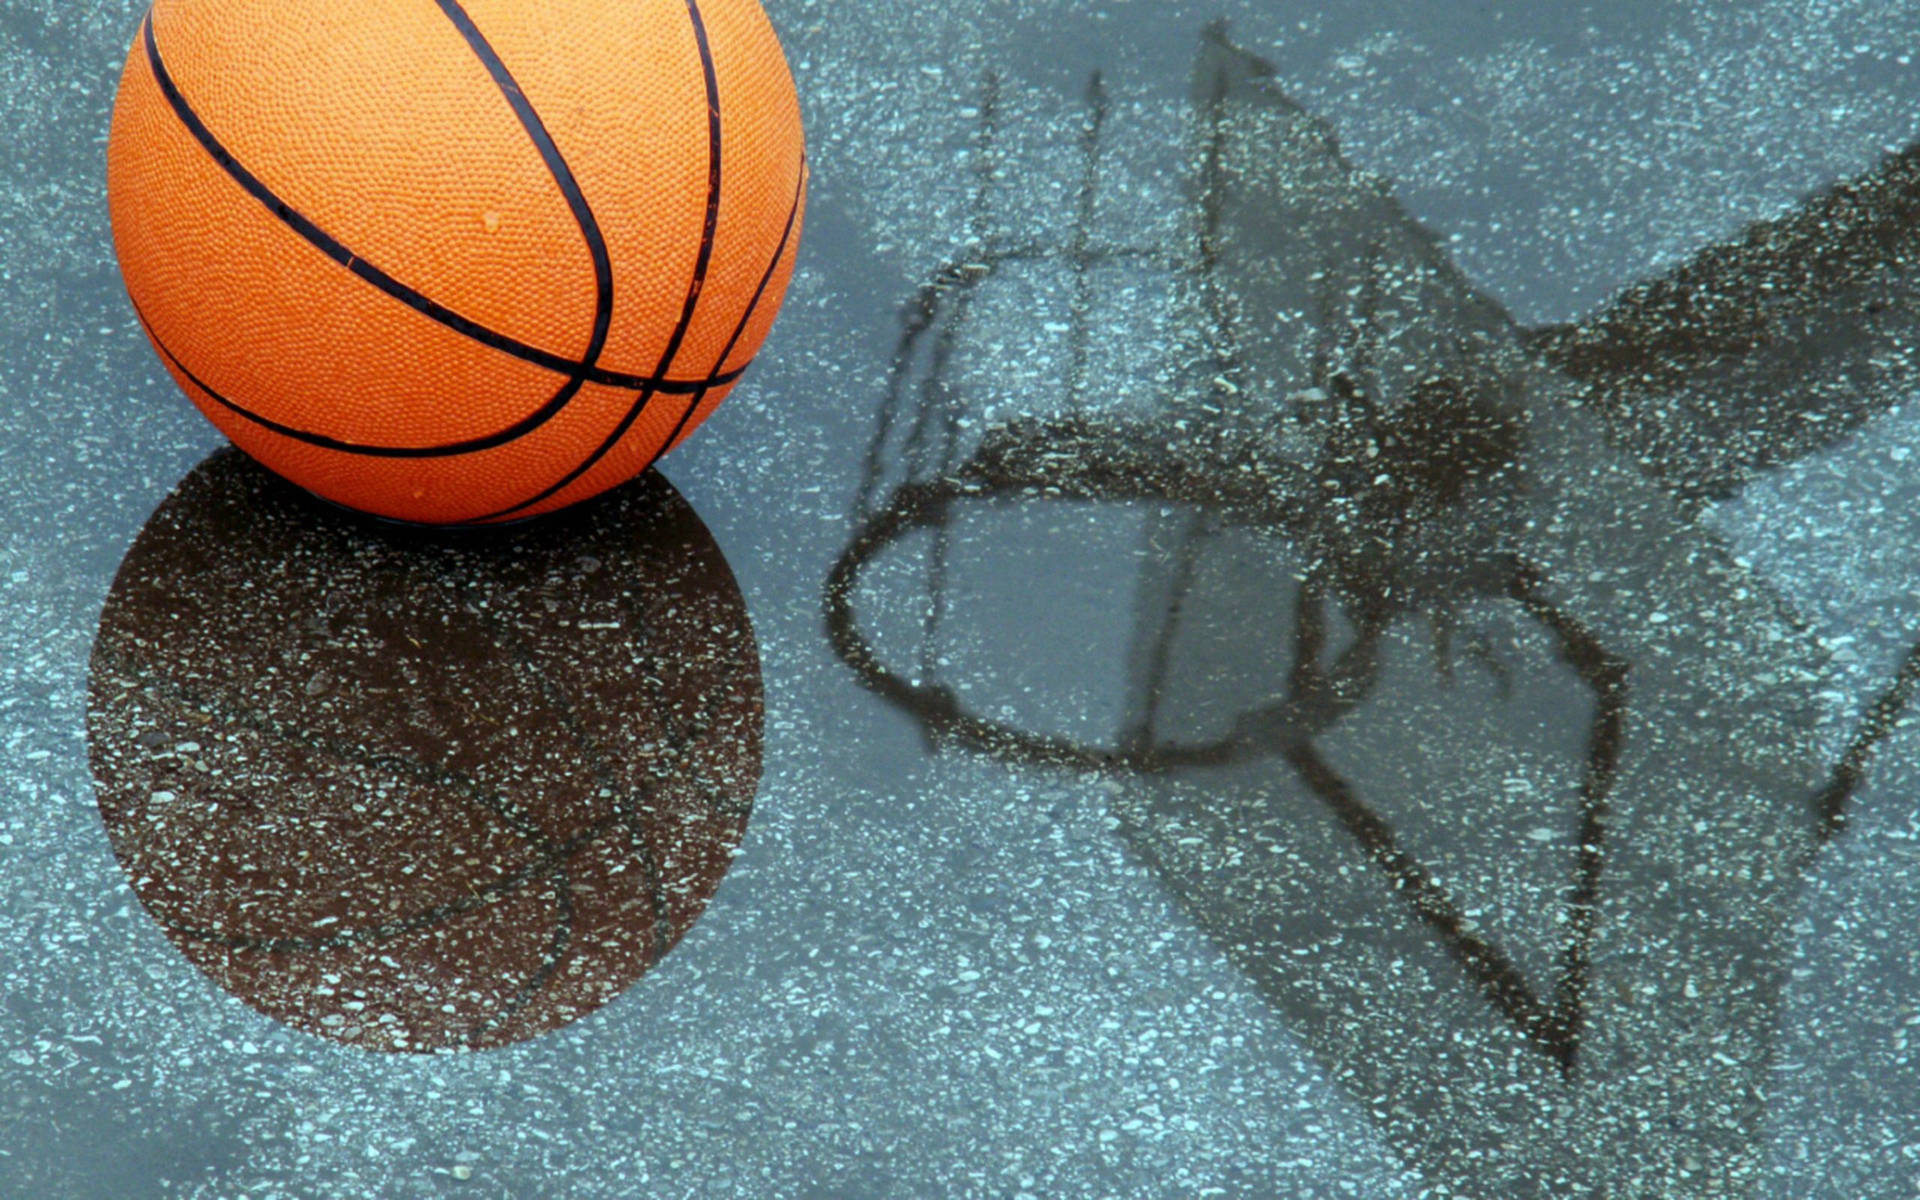 Basketball 2560X1600 Wallpaper and Background Image